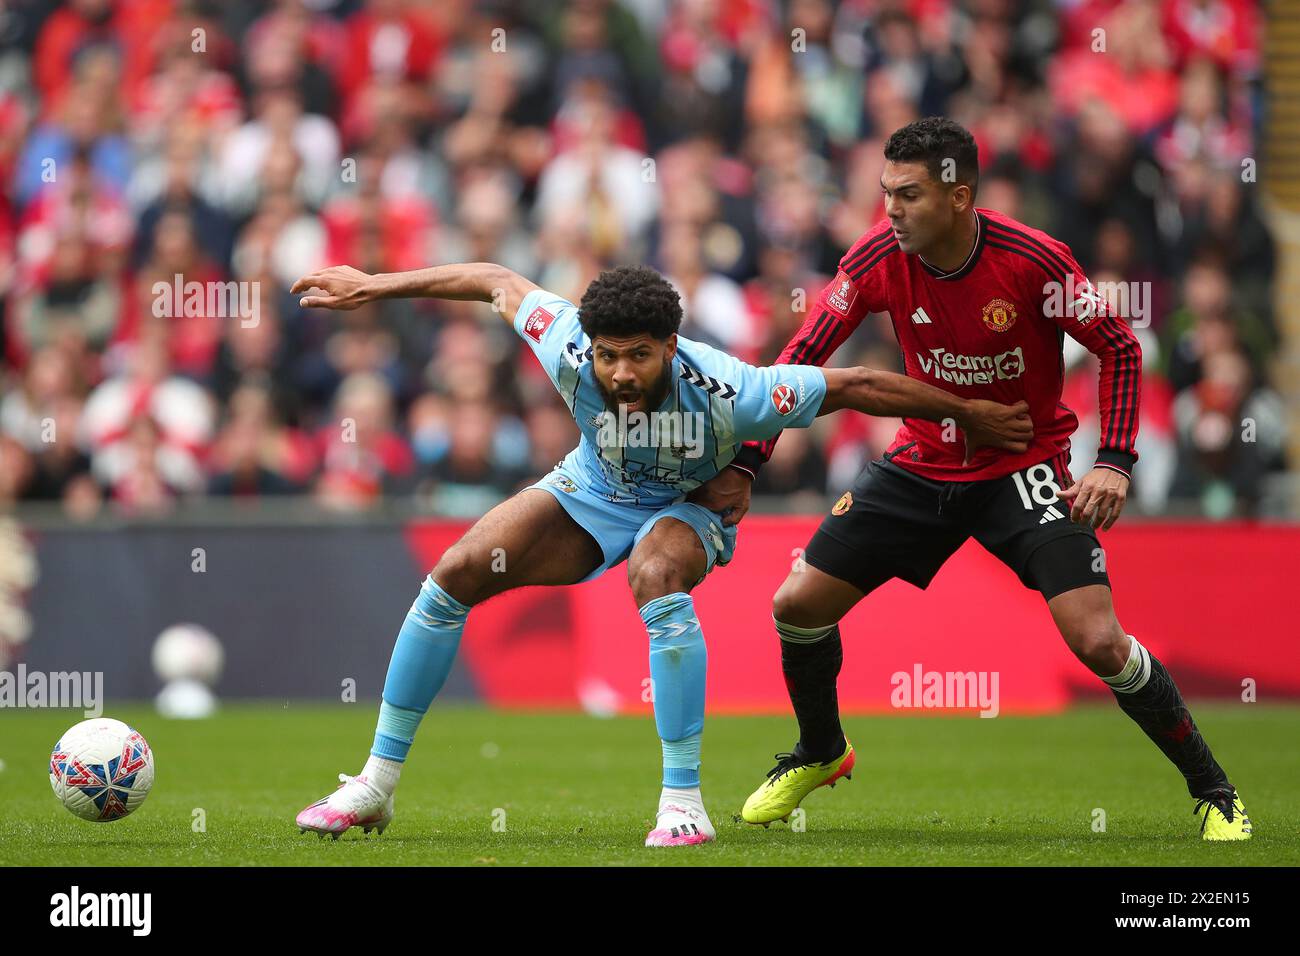 Ellis Simms of Coventry City and Casemiro of Manchester United - Coventry City v Manchester United, The Emirates FA Cup Semi Final, Wembley Stadium, London, UK - 21st April 2024 Stock Photo